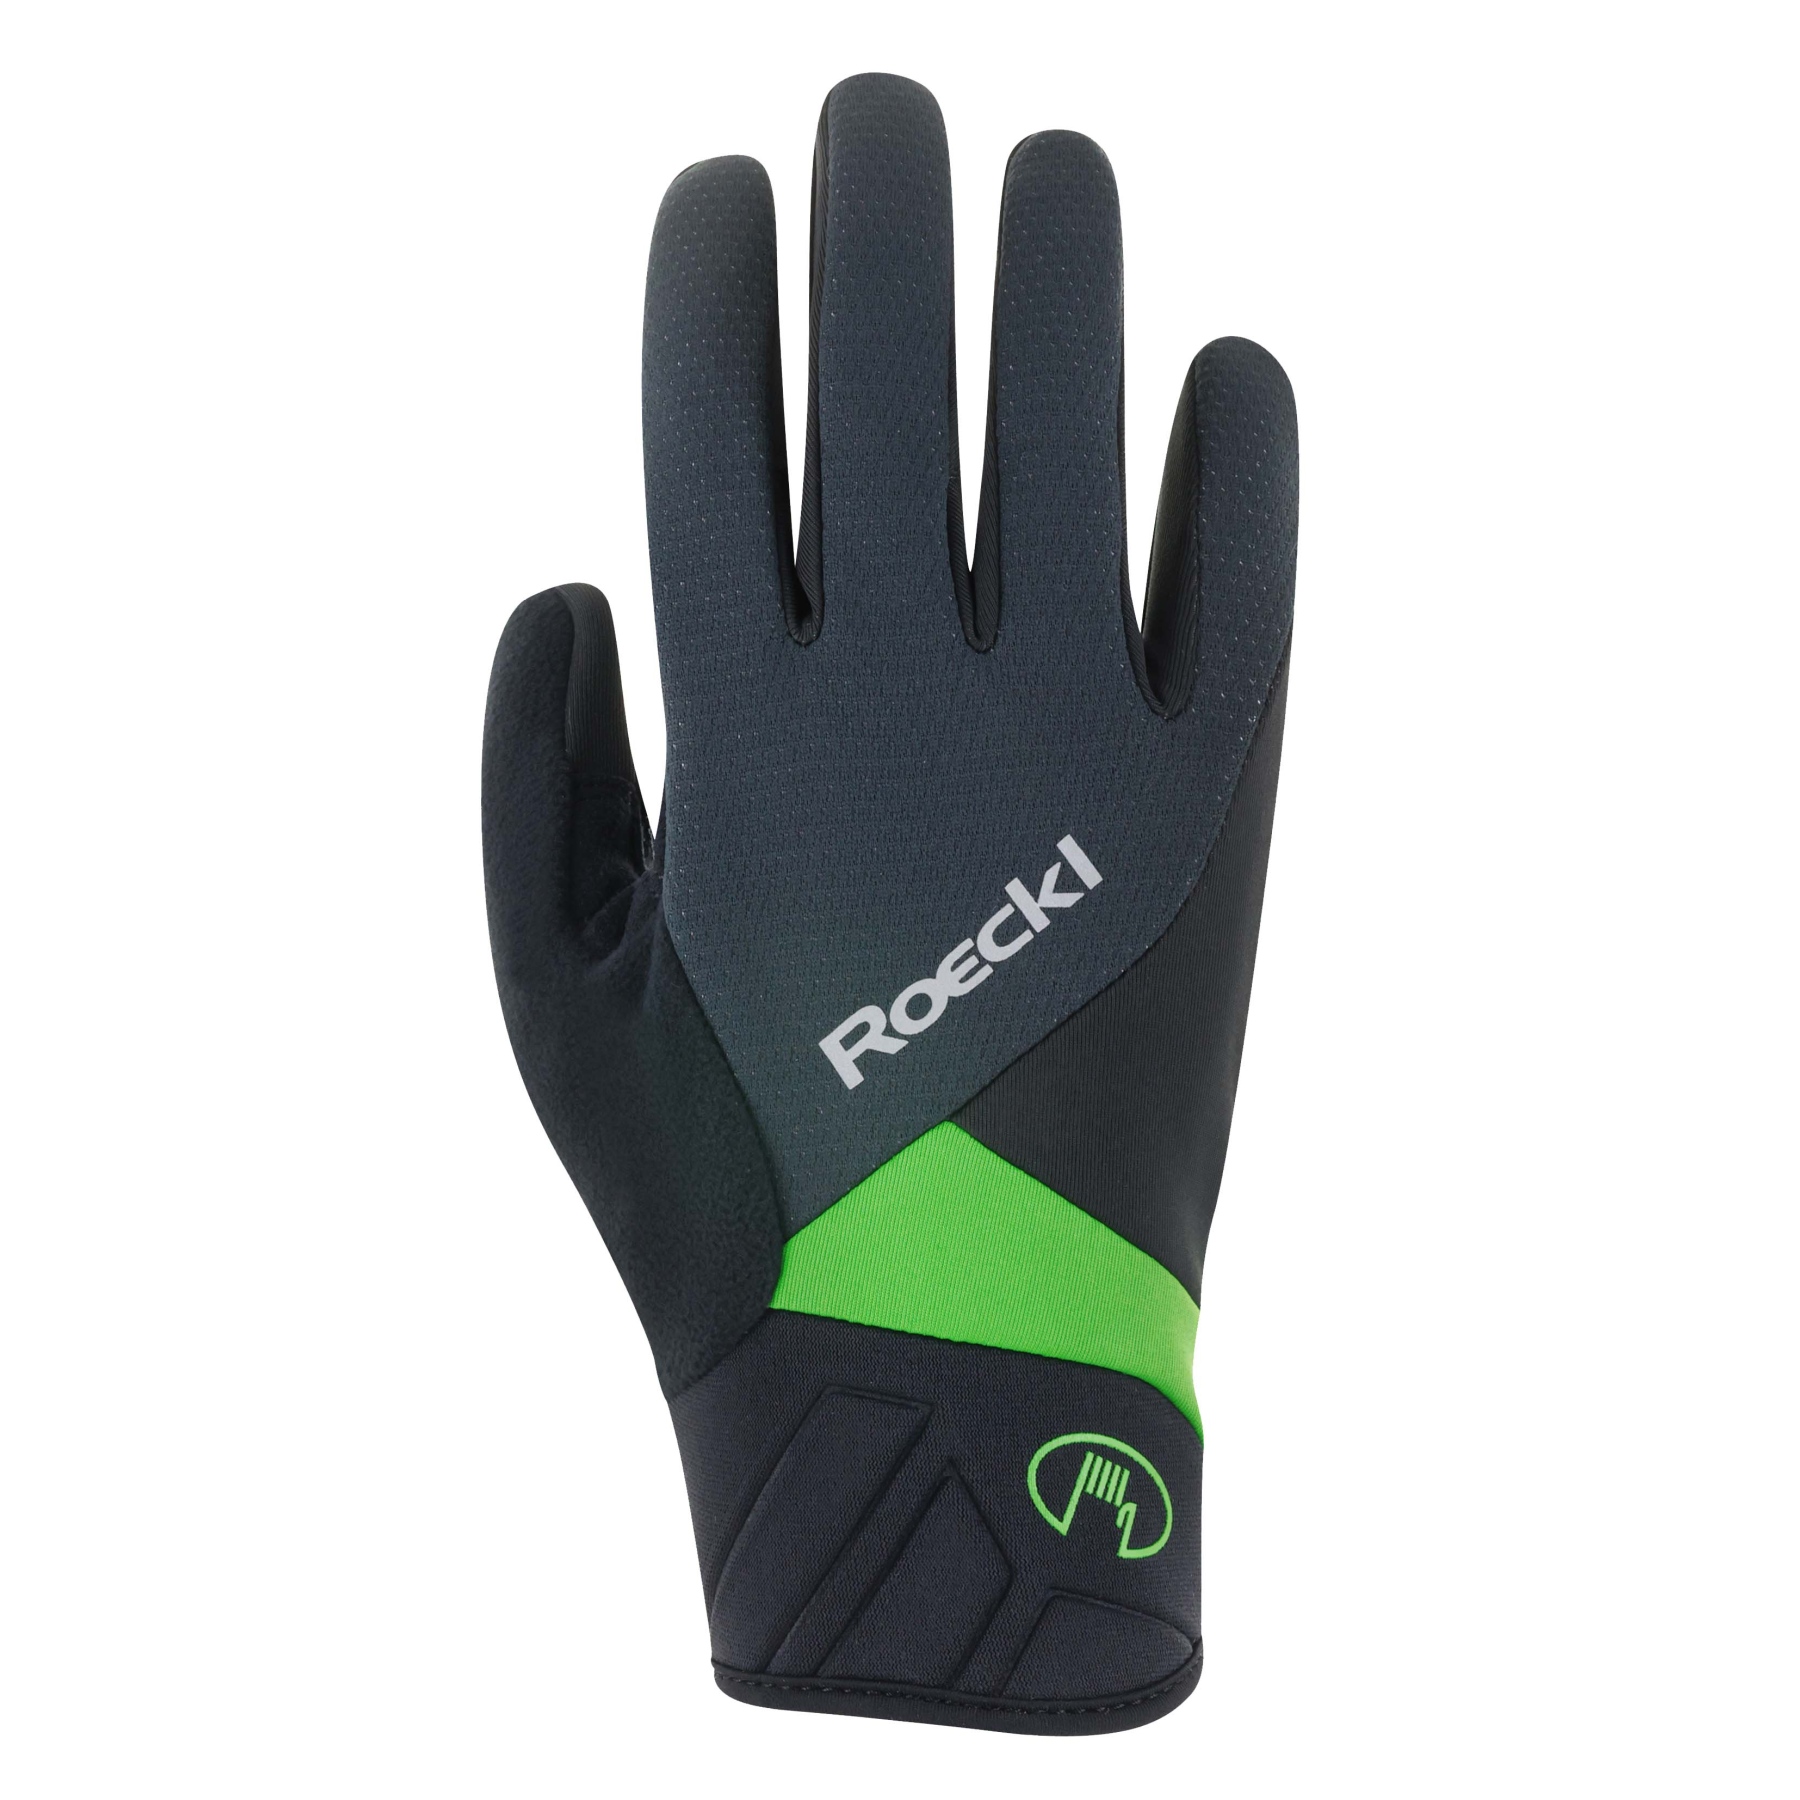 Picture of Roeckl Sports Runaz Cycling Gloves - black/classic green 9020